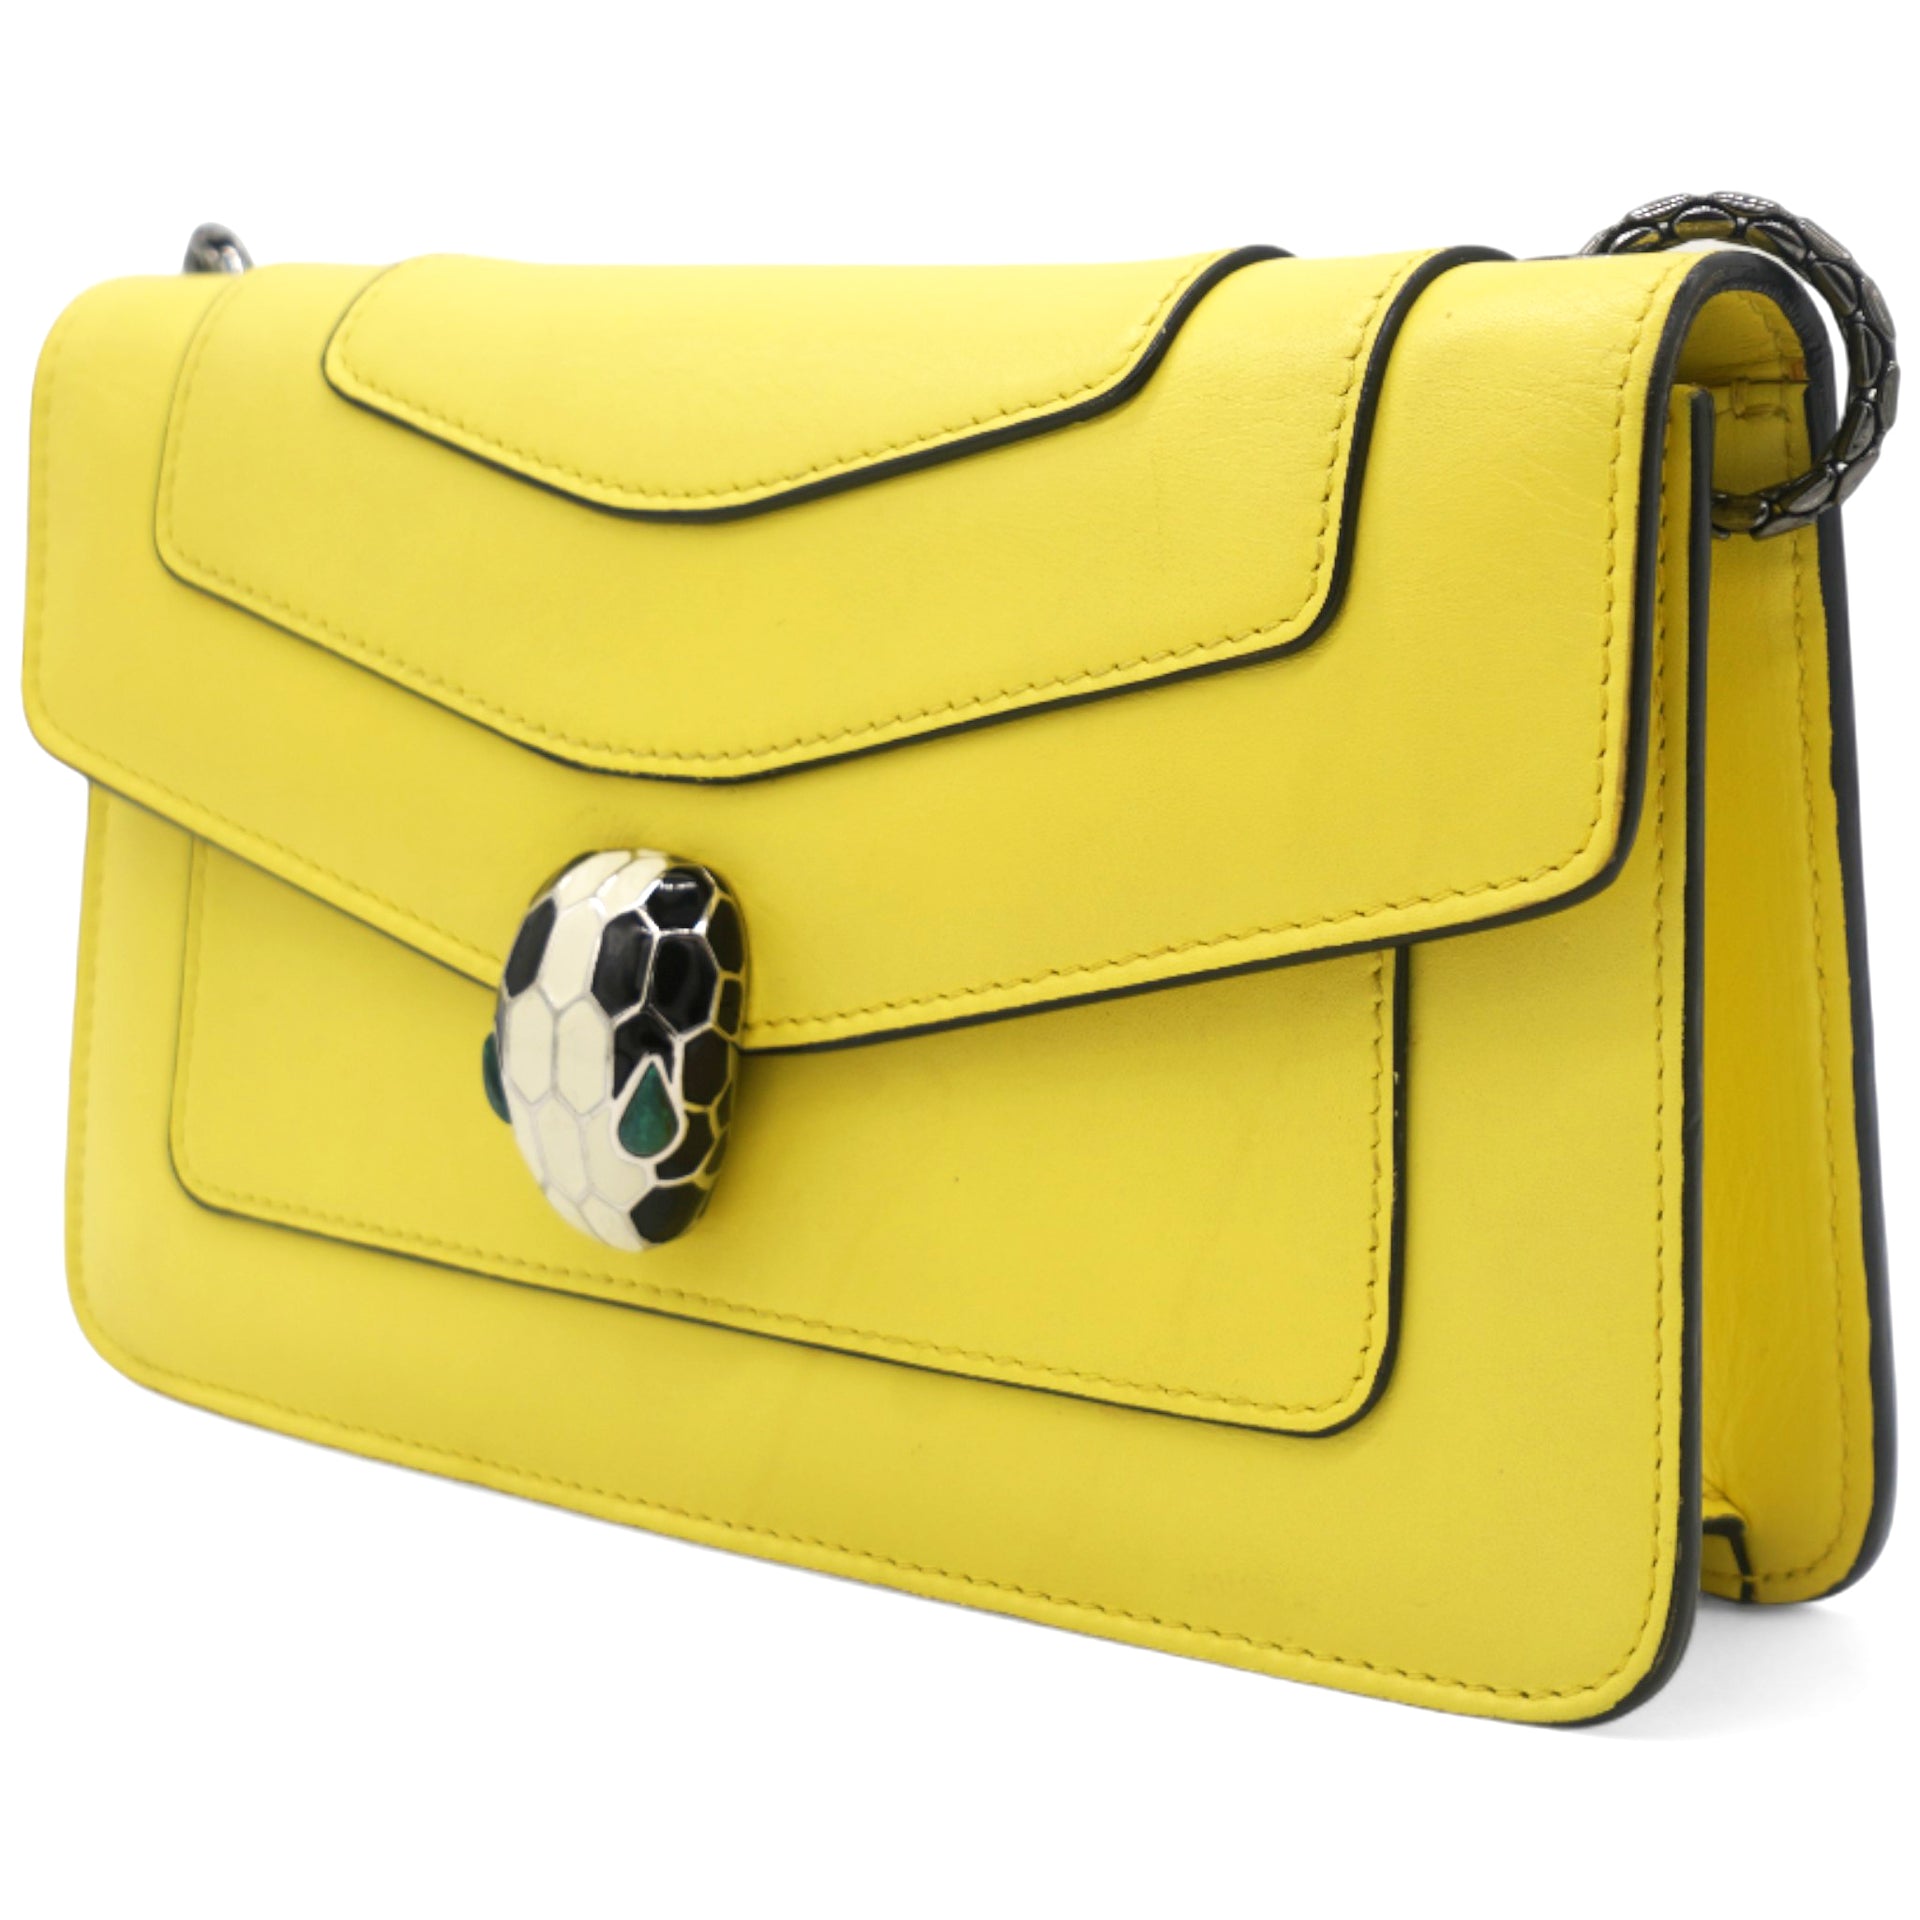 Serpenti Forever Small Shoulder Bag Yellow